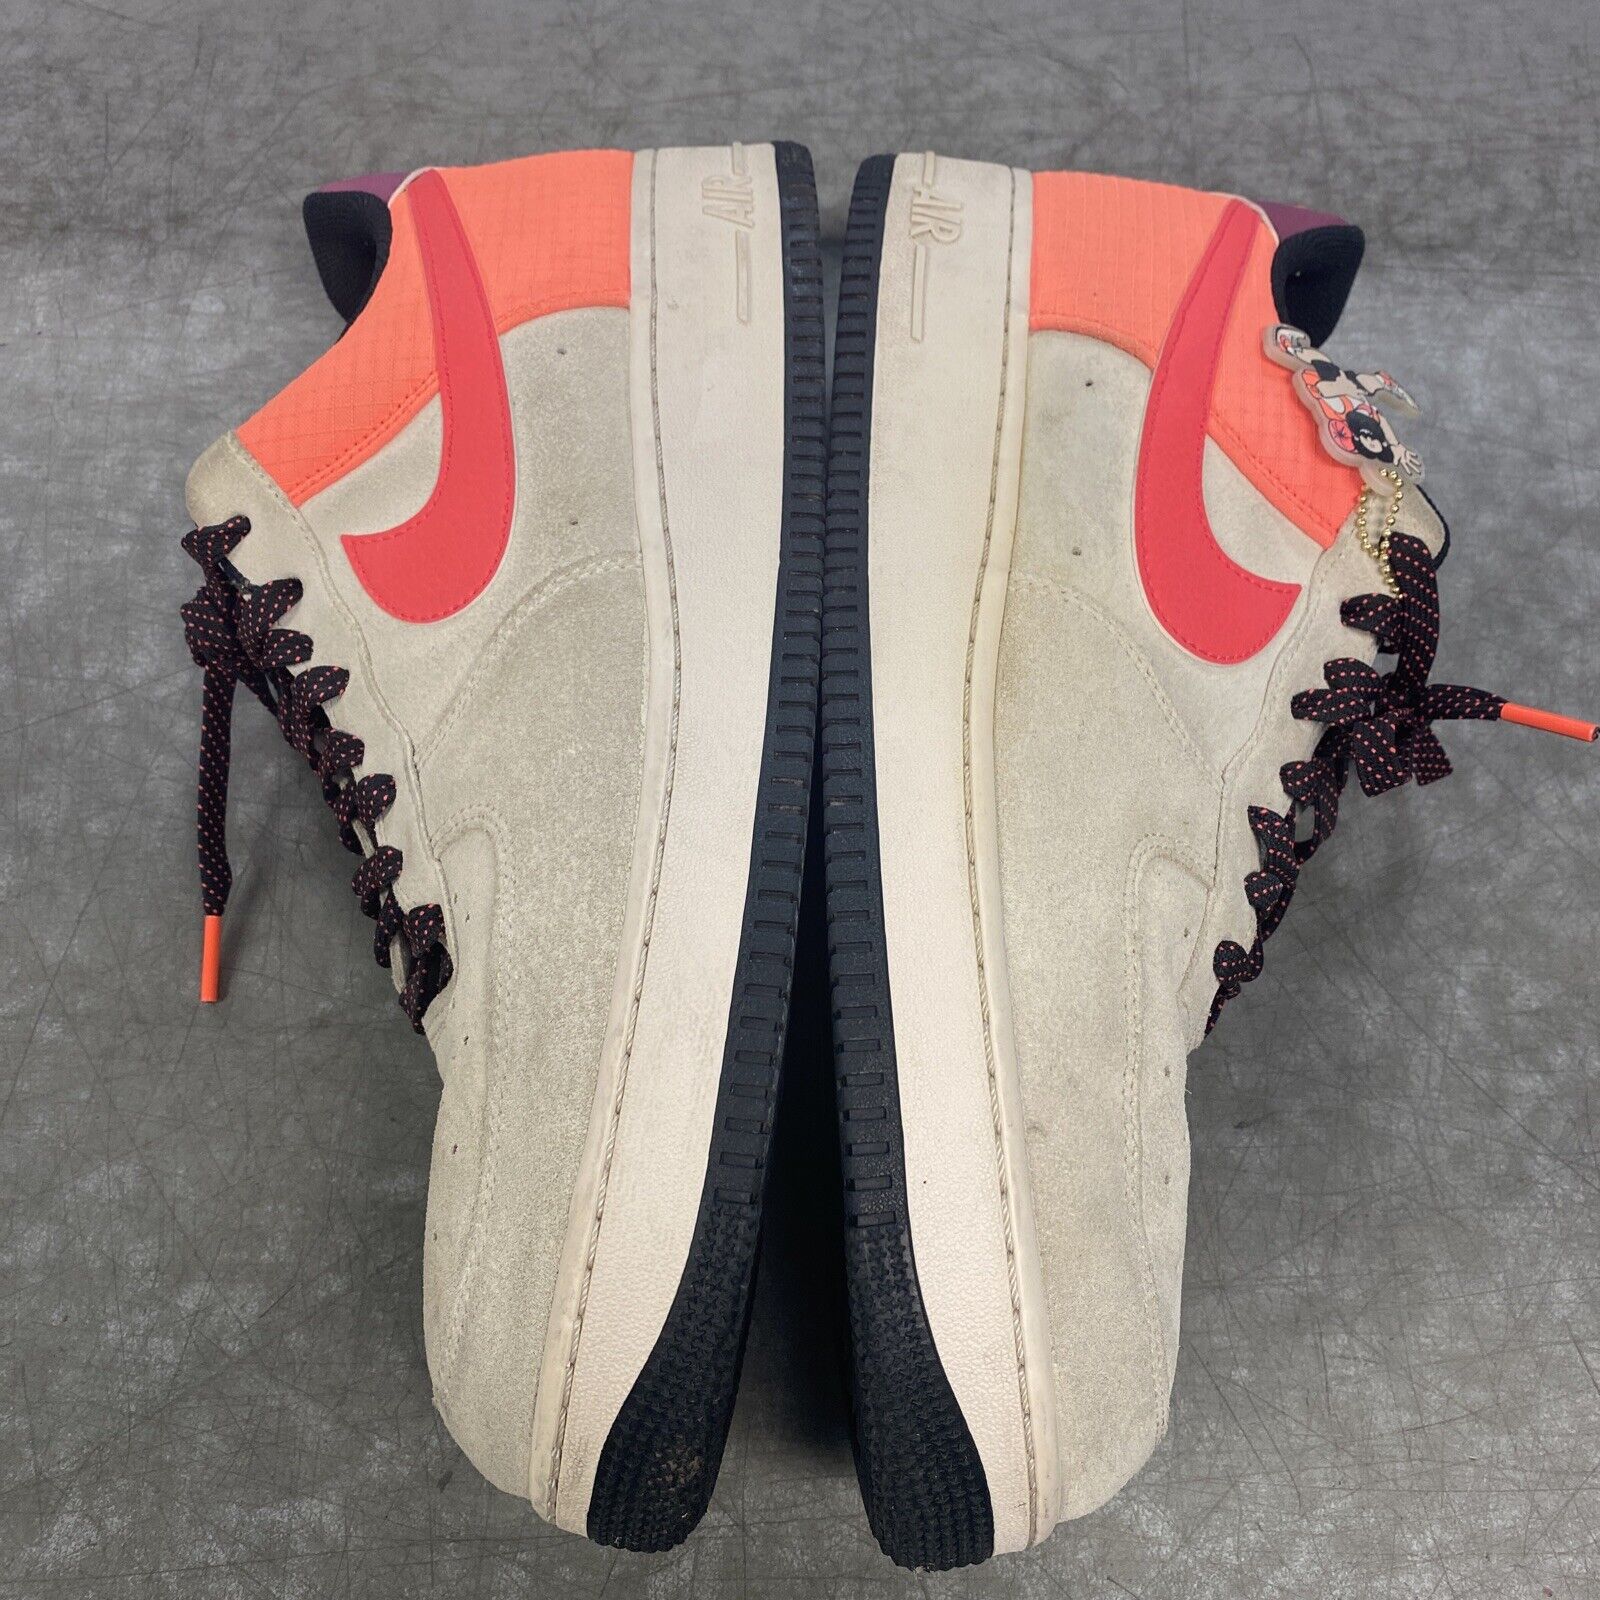 nike air force 1 lv8 size 13